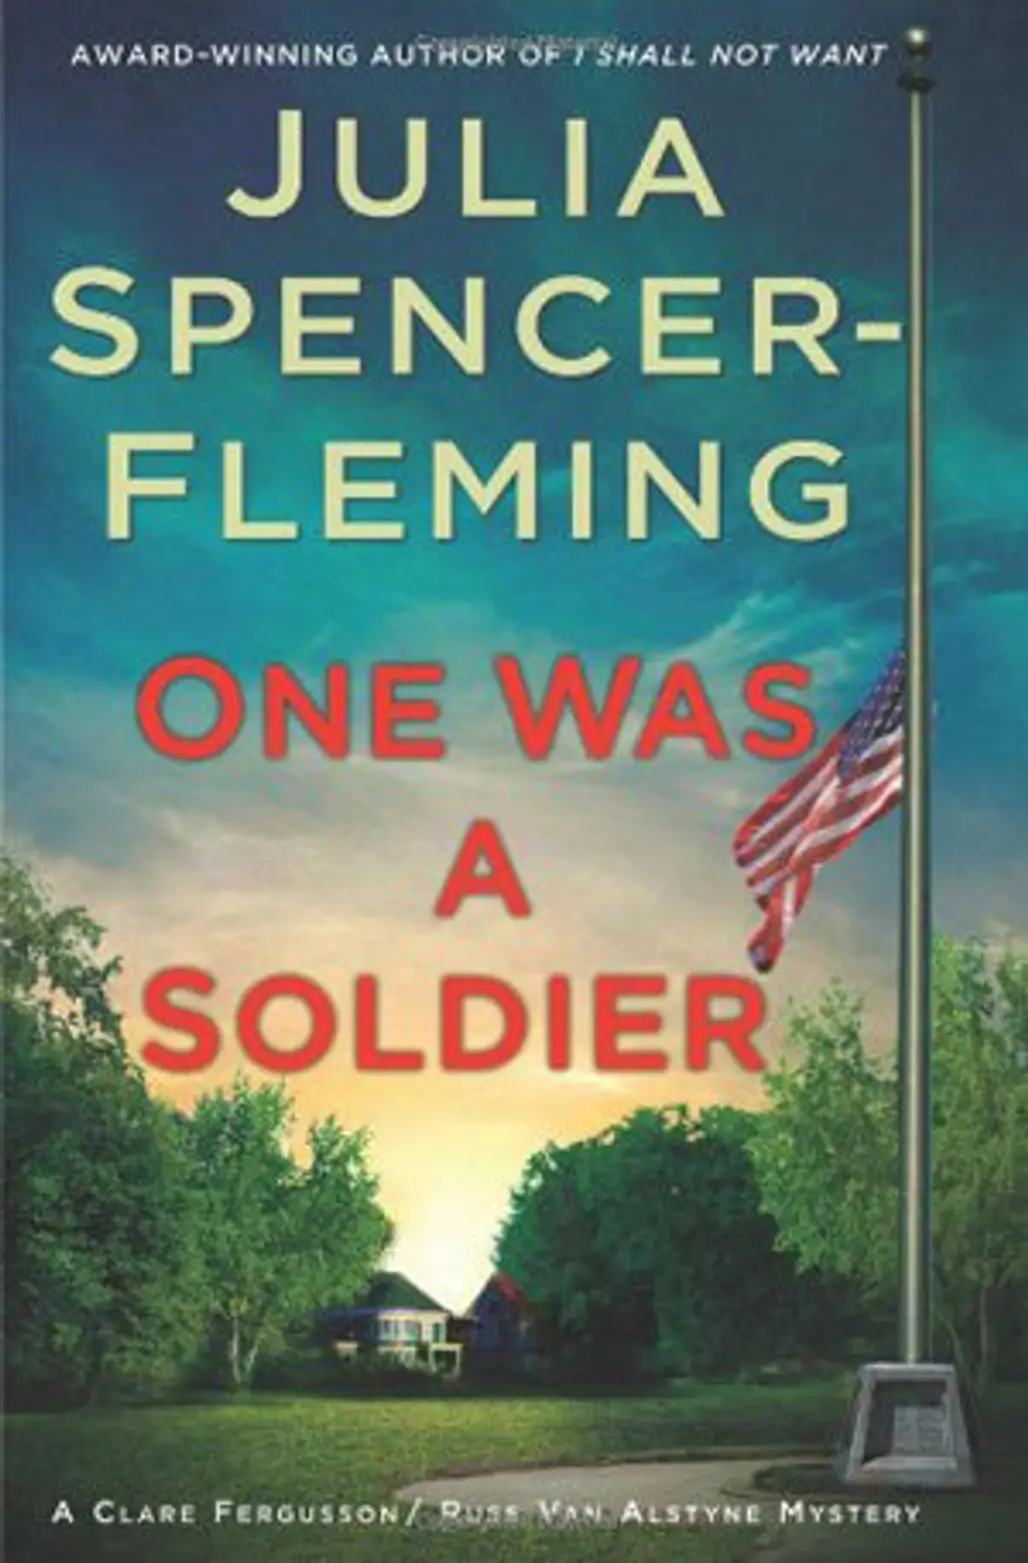 One Was a Soldier by Julia Spencer Fleming